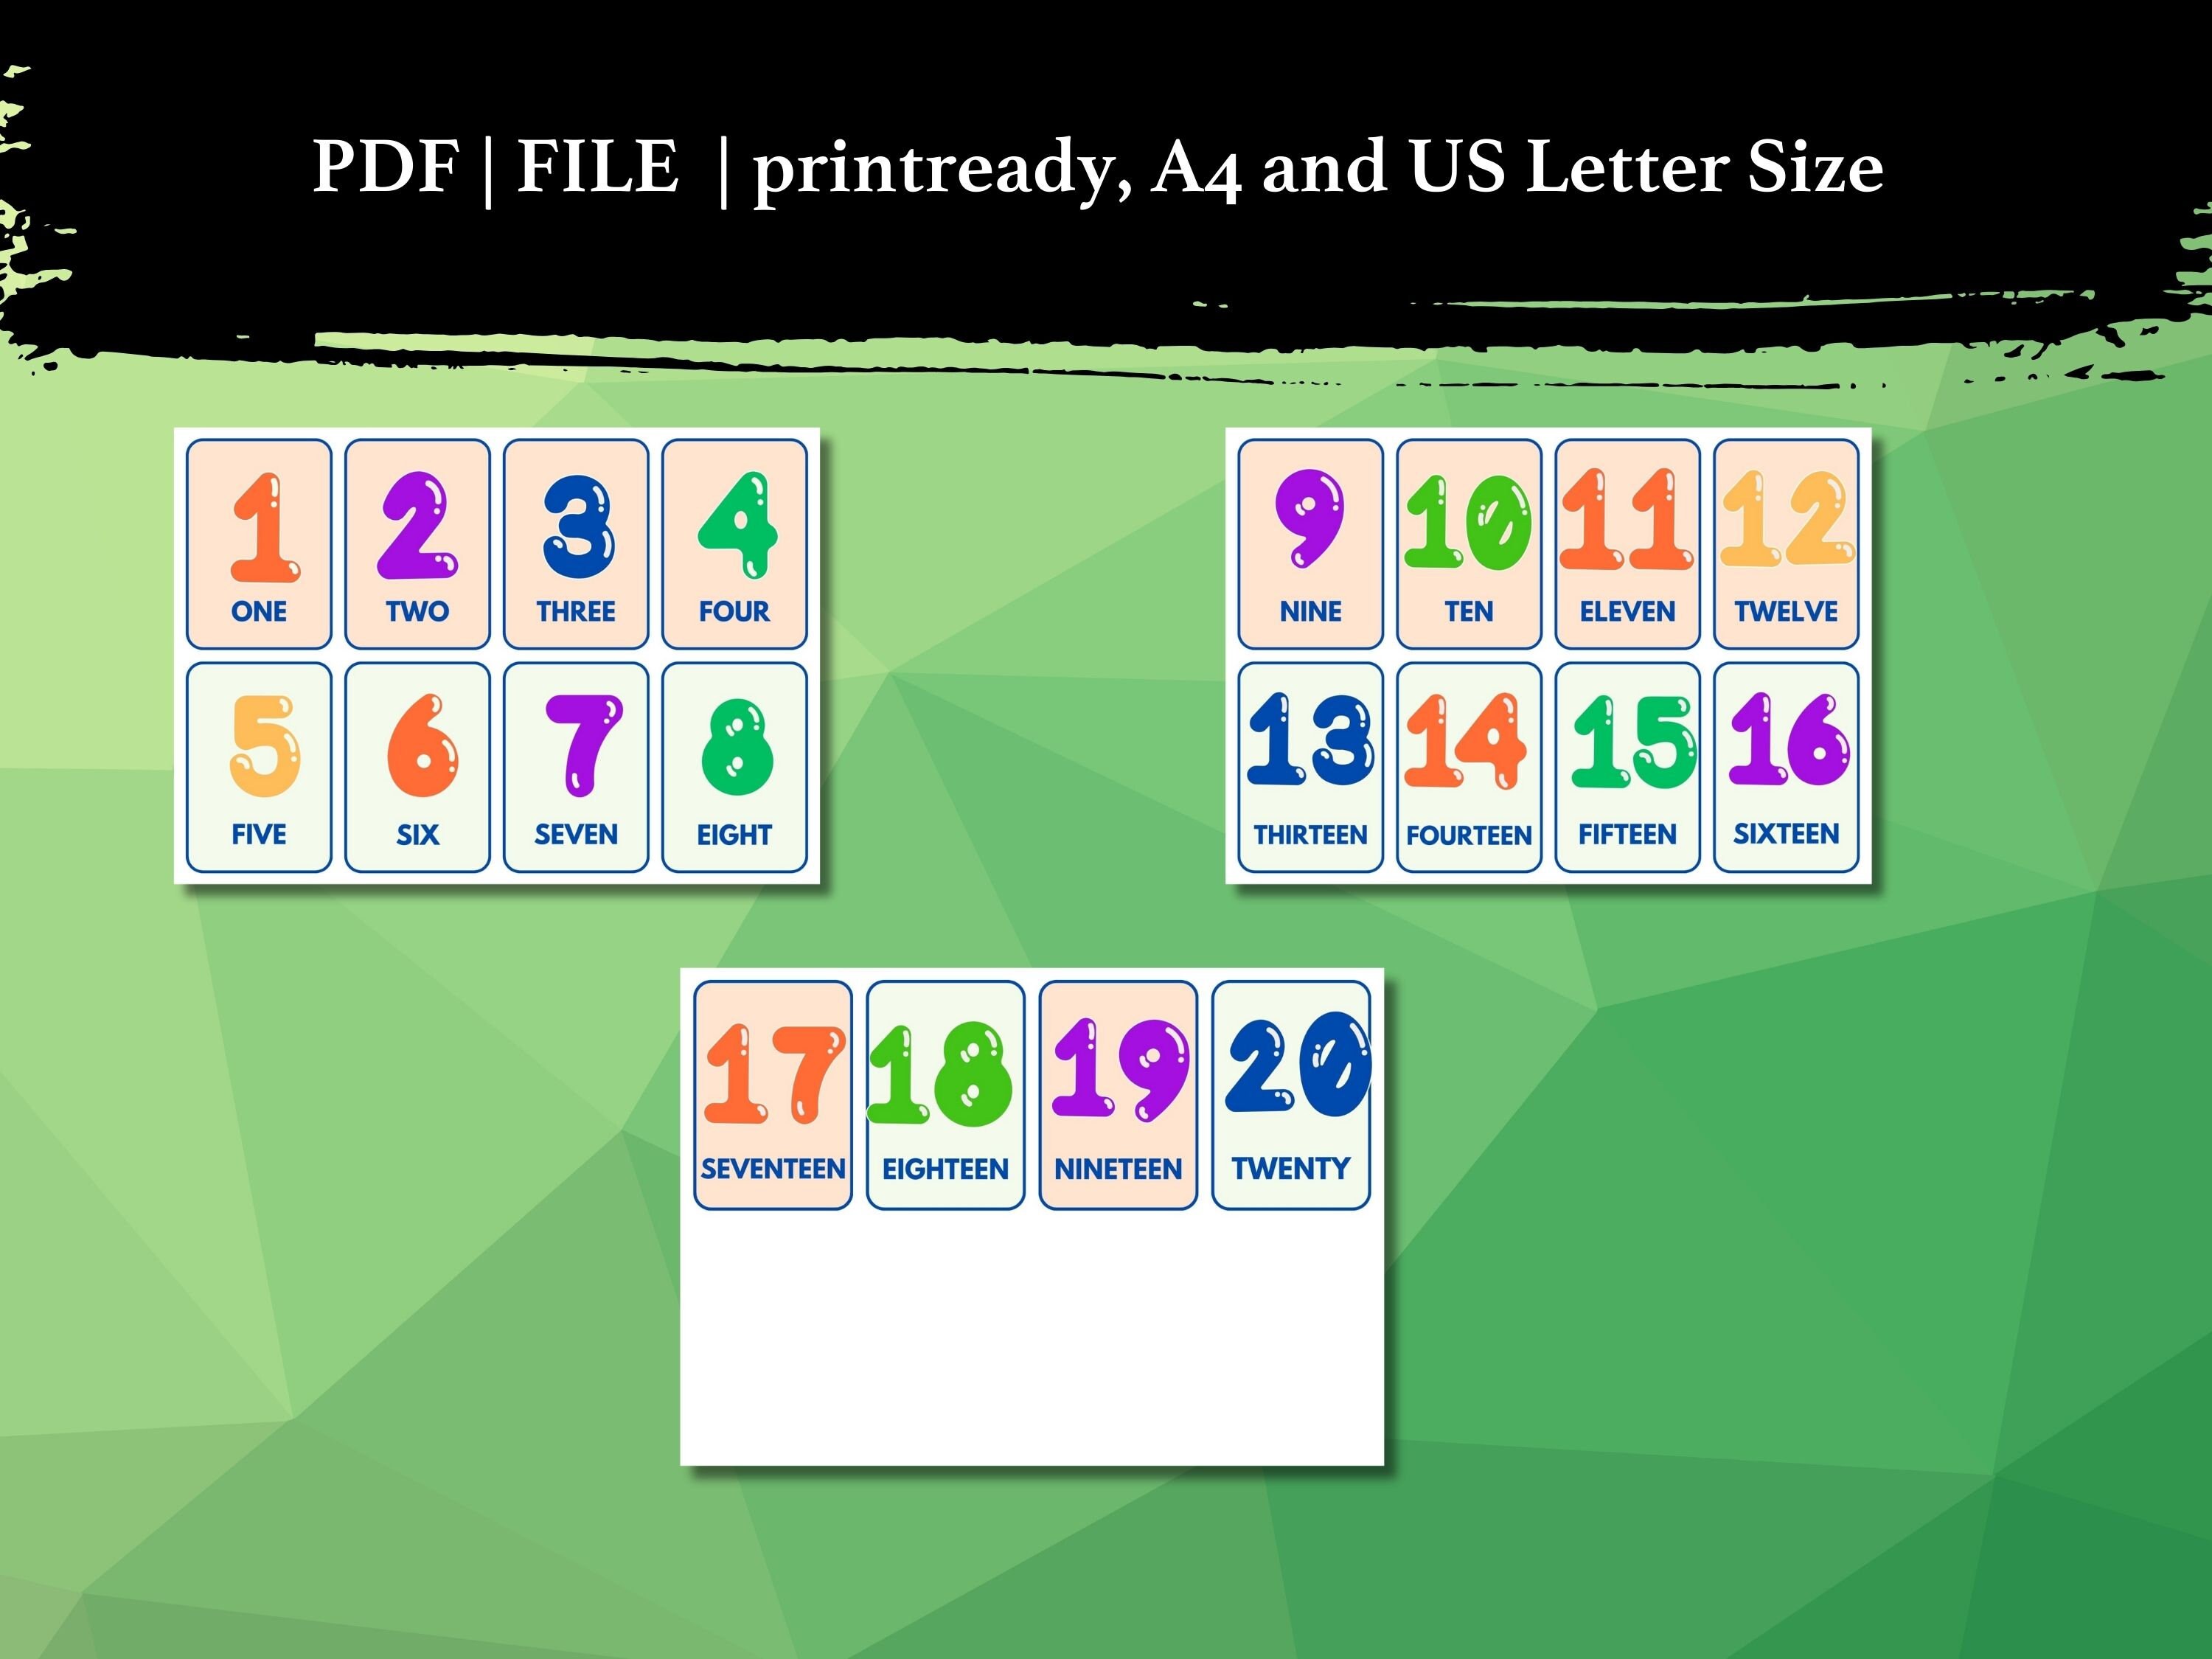 Numbers flash cards to numbers coloring pages flash cards set preschool numbers kindergarten cards number cards numbers printables